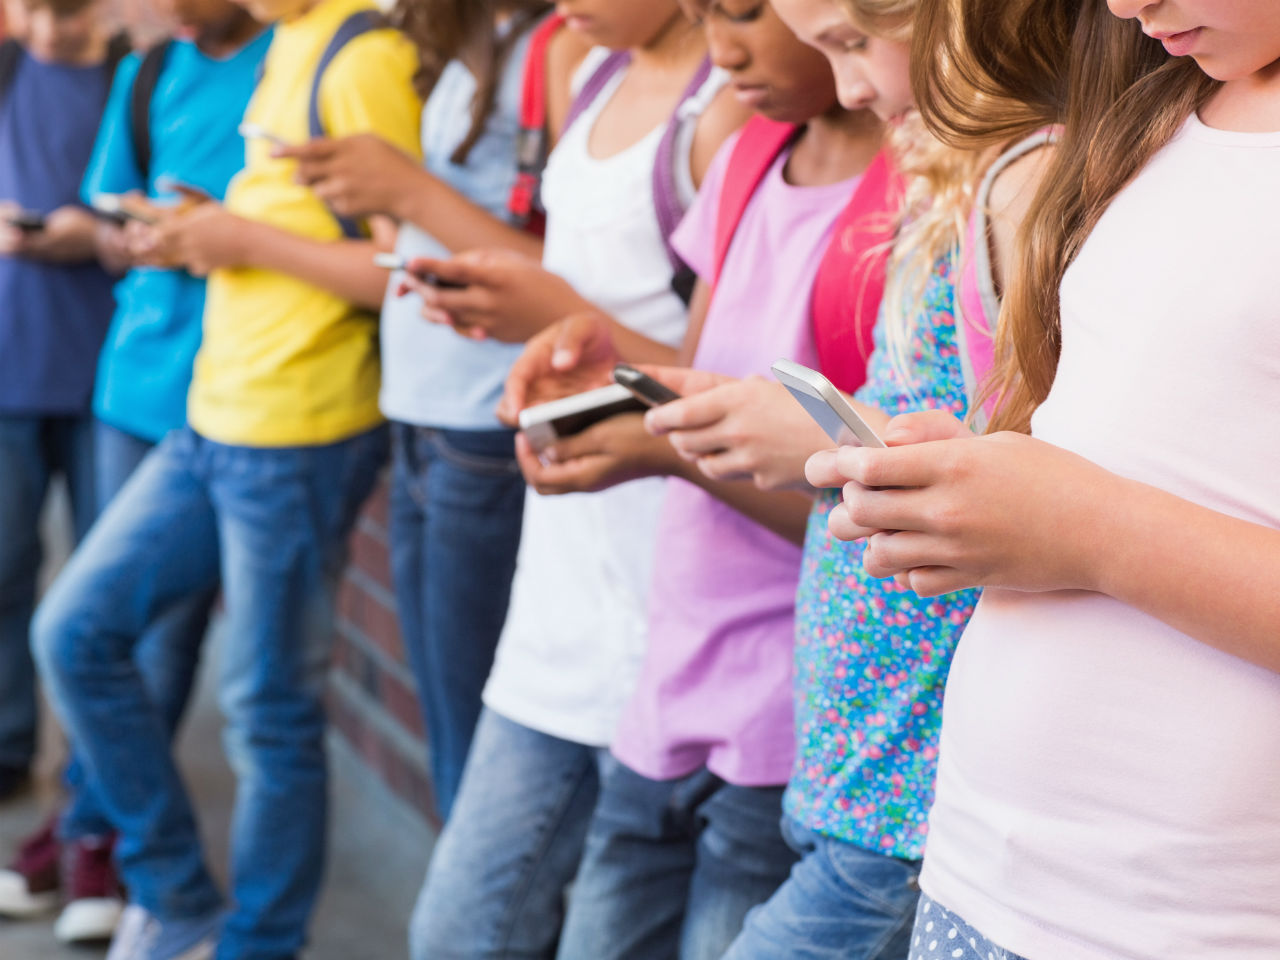 Is it time schools allowed cellphones in the classroom?